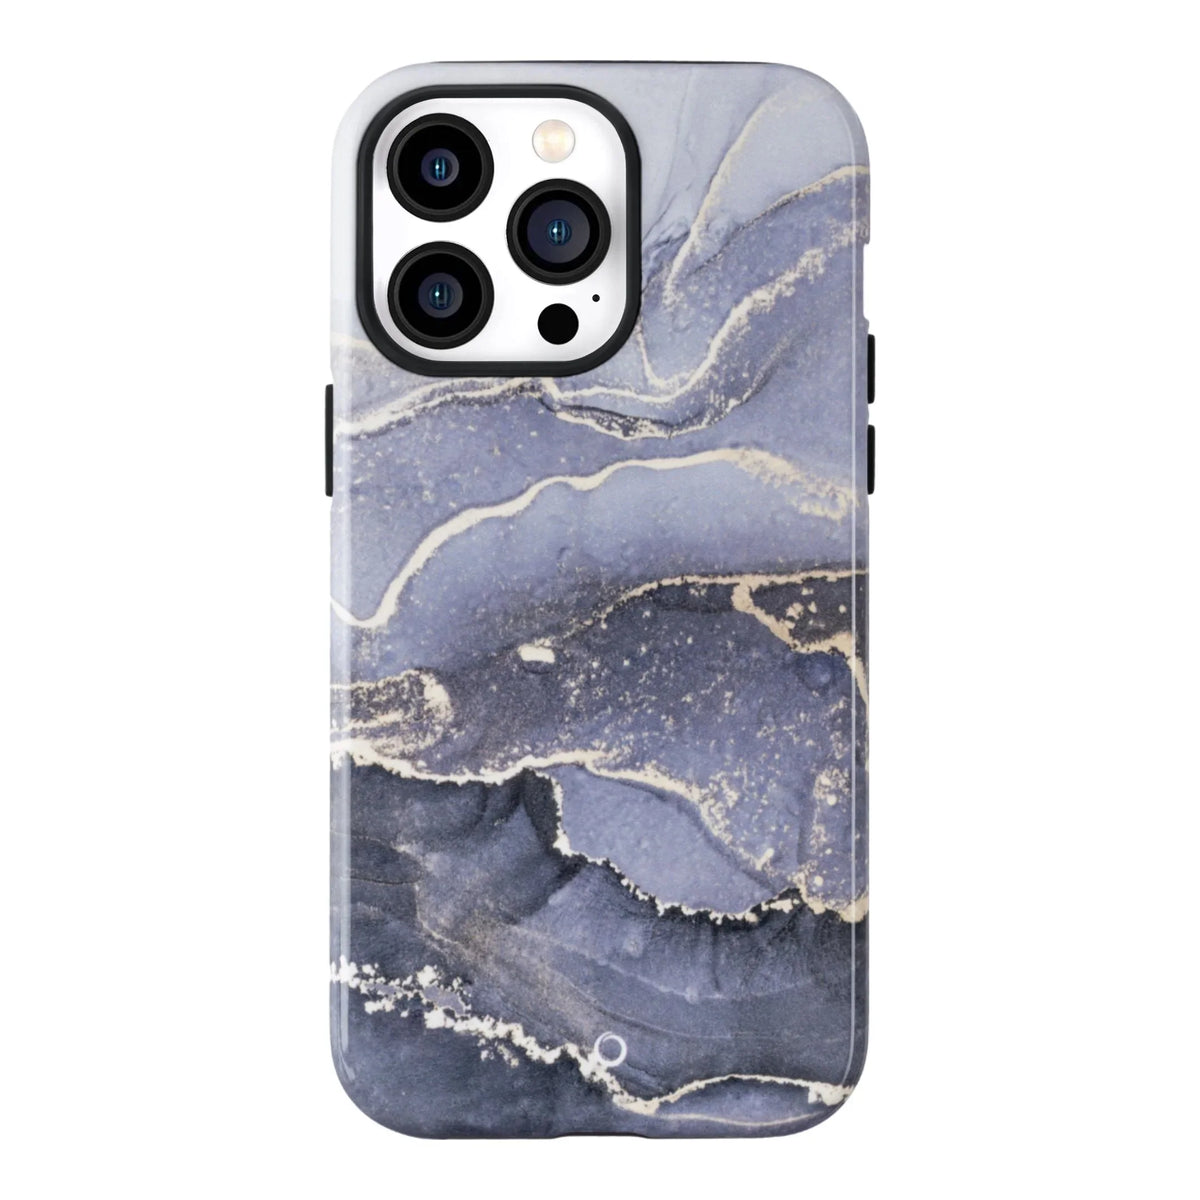 Charcoal Marble iPhone Case - iPhone 11 Pro